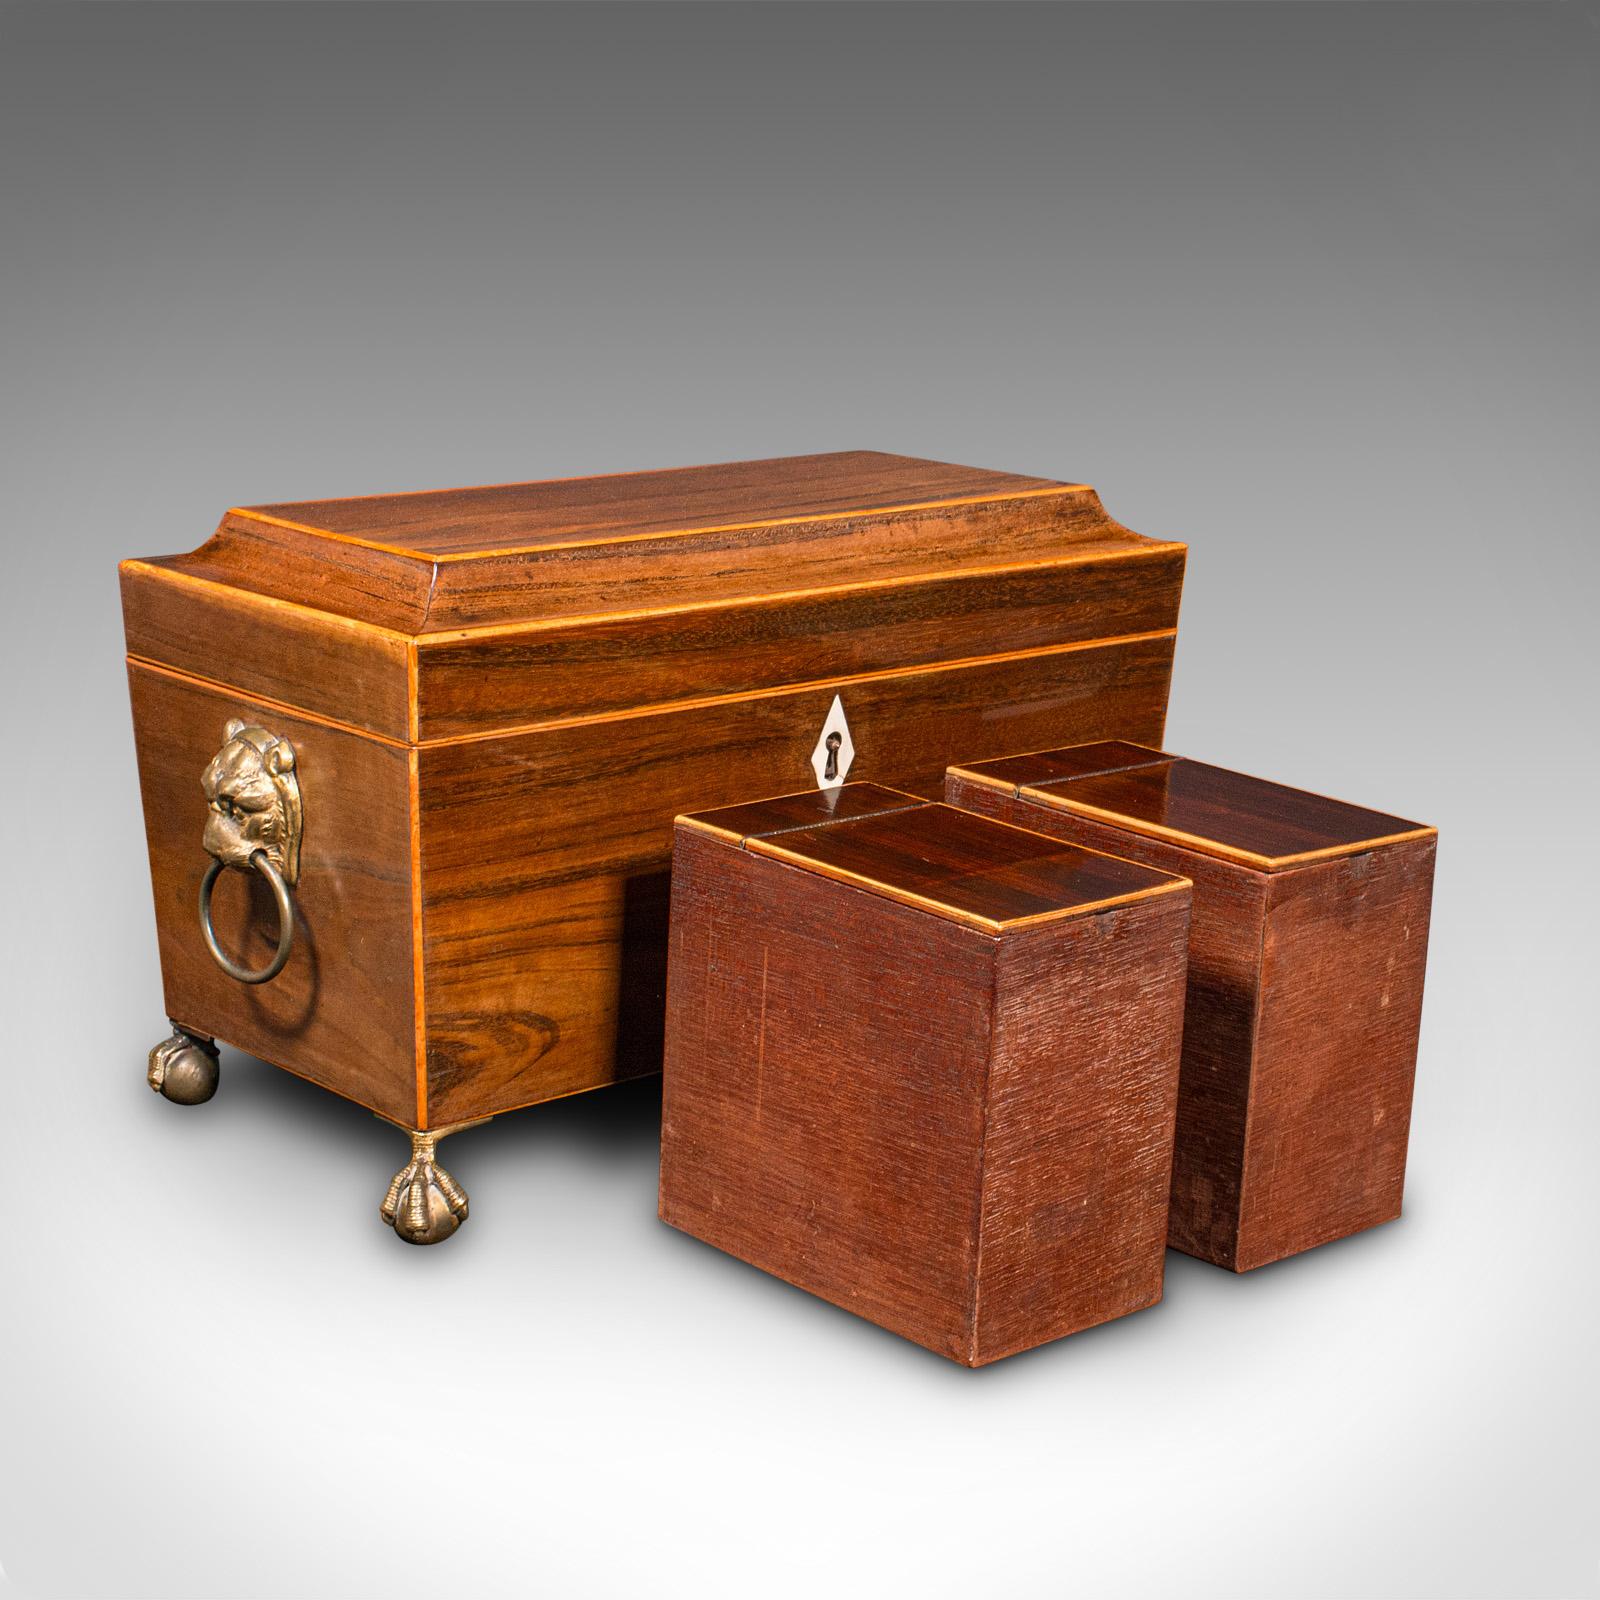 This is an antique sarcophagus tea caddy. An English, rosewood case with glass mixer, dating to the Regency period, circa 1820.

Appealing craftsmanship with a striking decorative appearance
Displays a desirable aged patina and in good order
Select